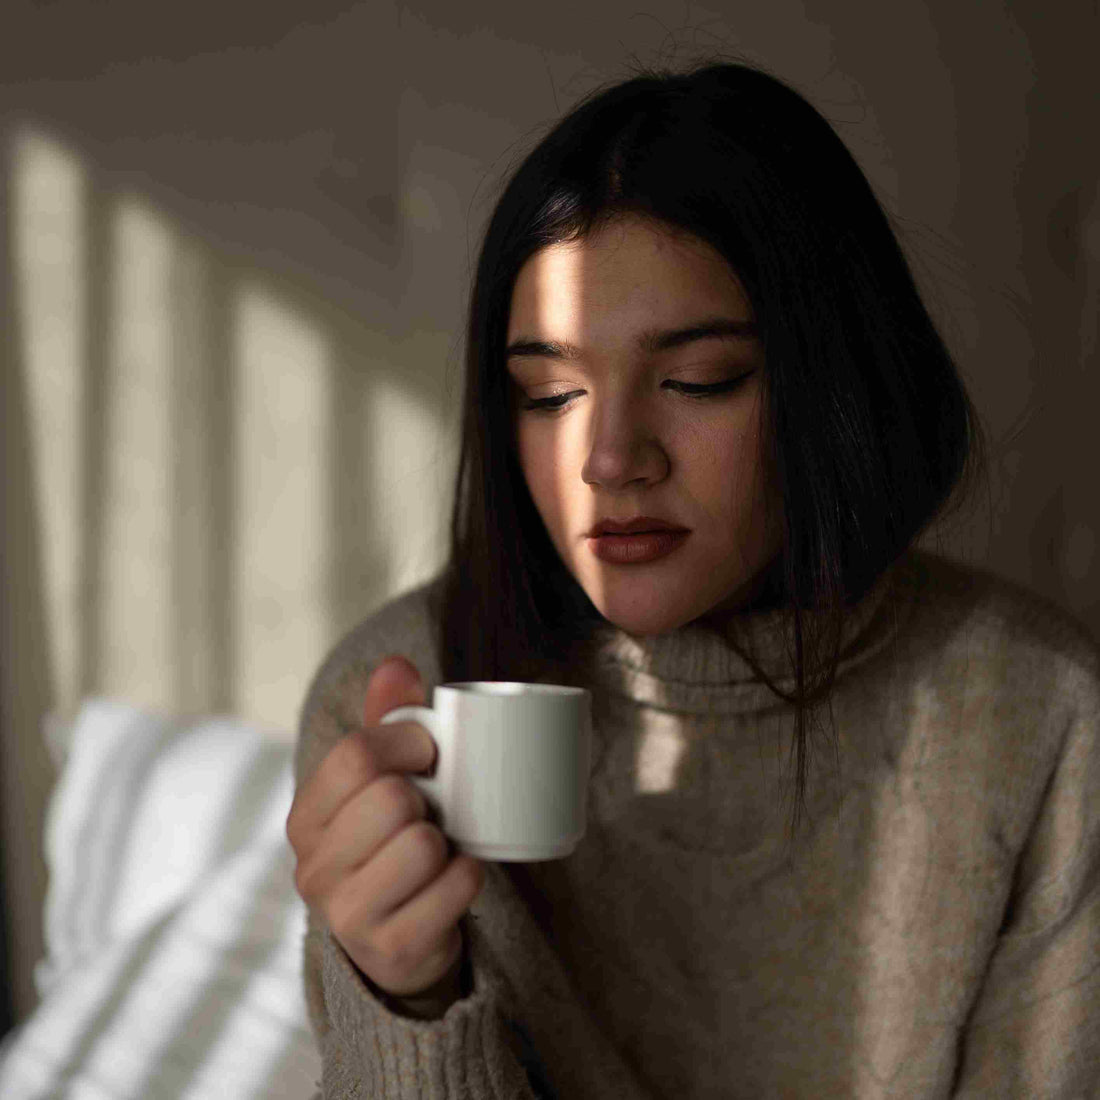 7 Ways to Look After Your Mental Health This Winter